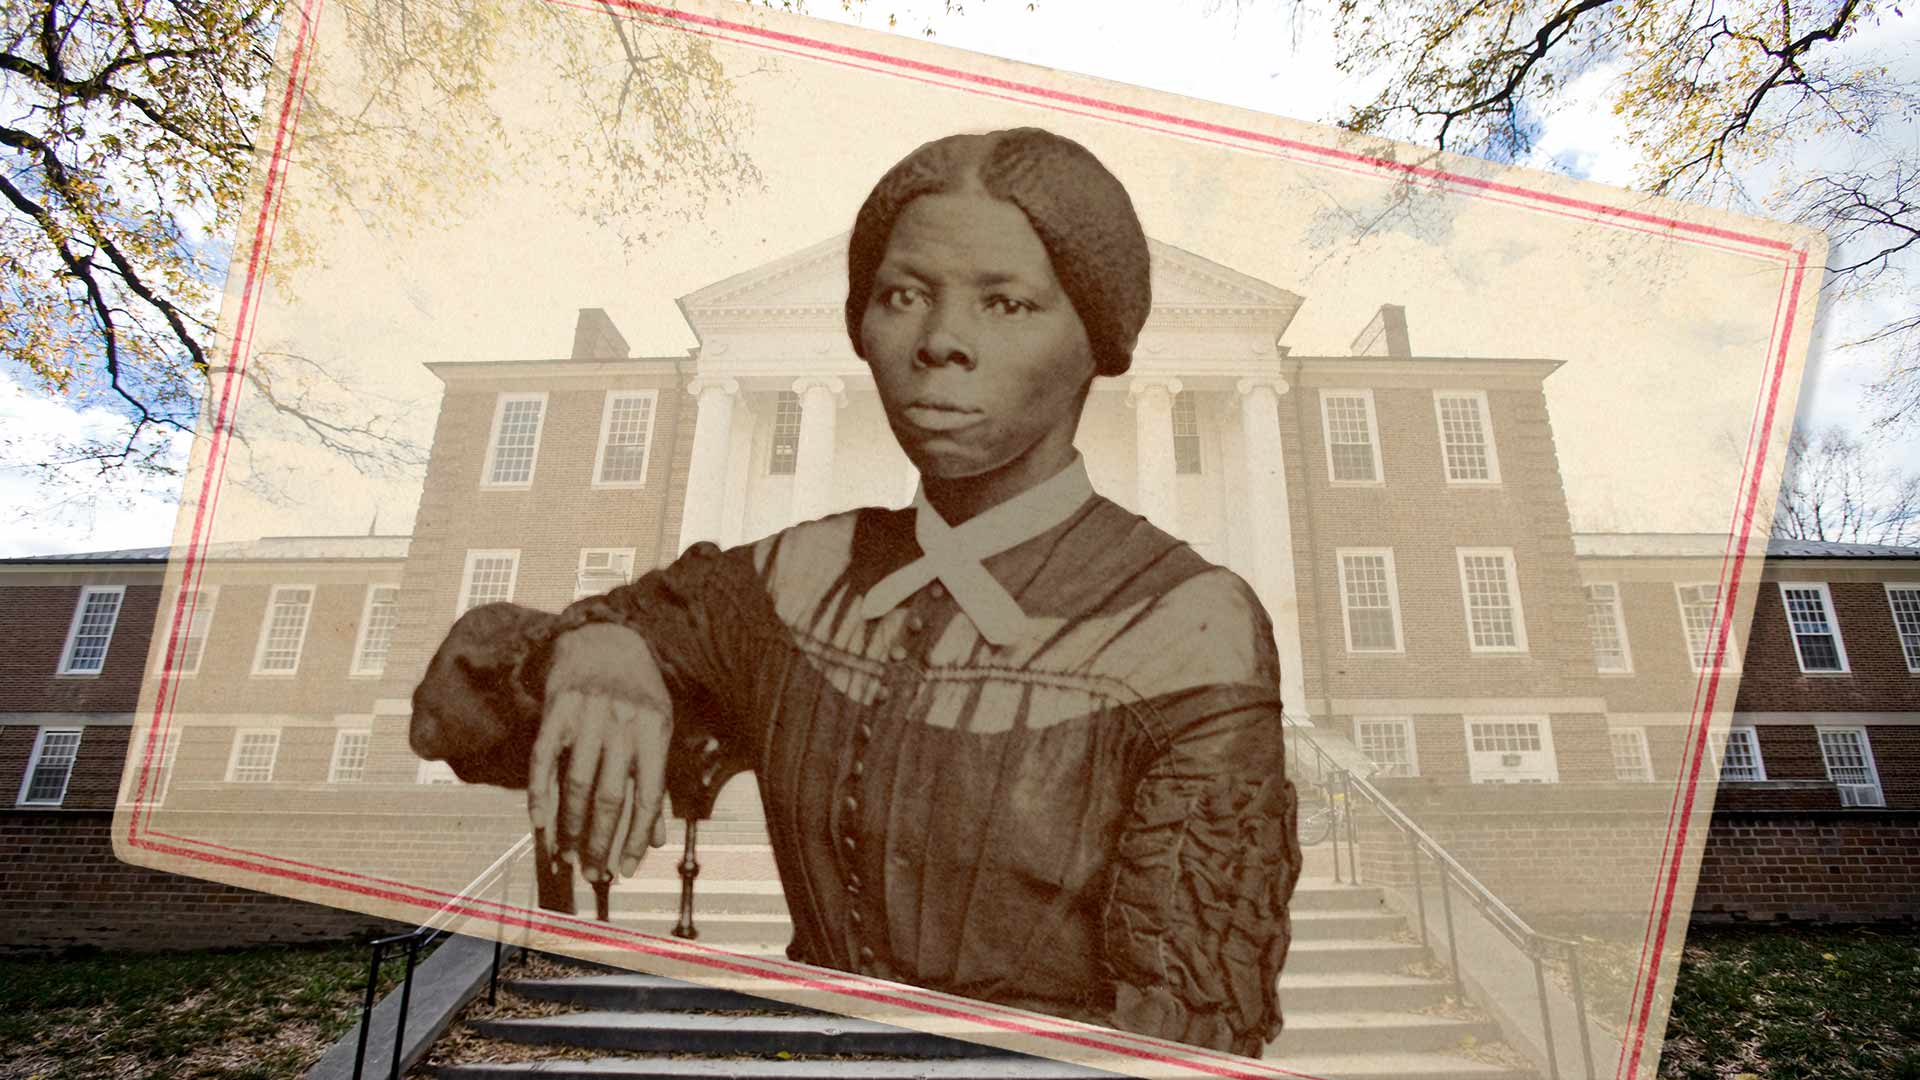 Woods Hall image by John T. Consoli; Tubman image credit: National Museum of African American History and Culture, Library of Congress; Collage by Stephanie S. Cordle